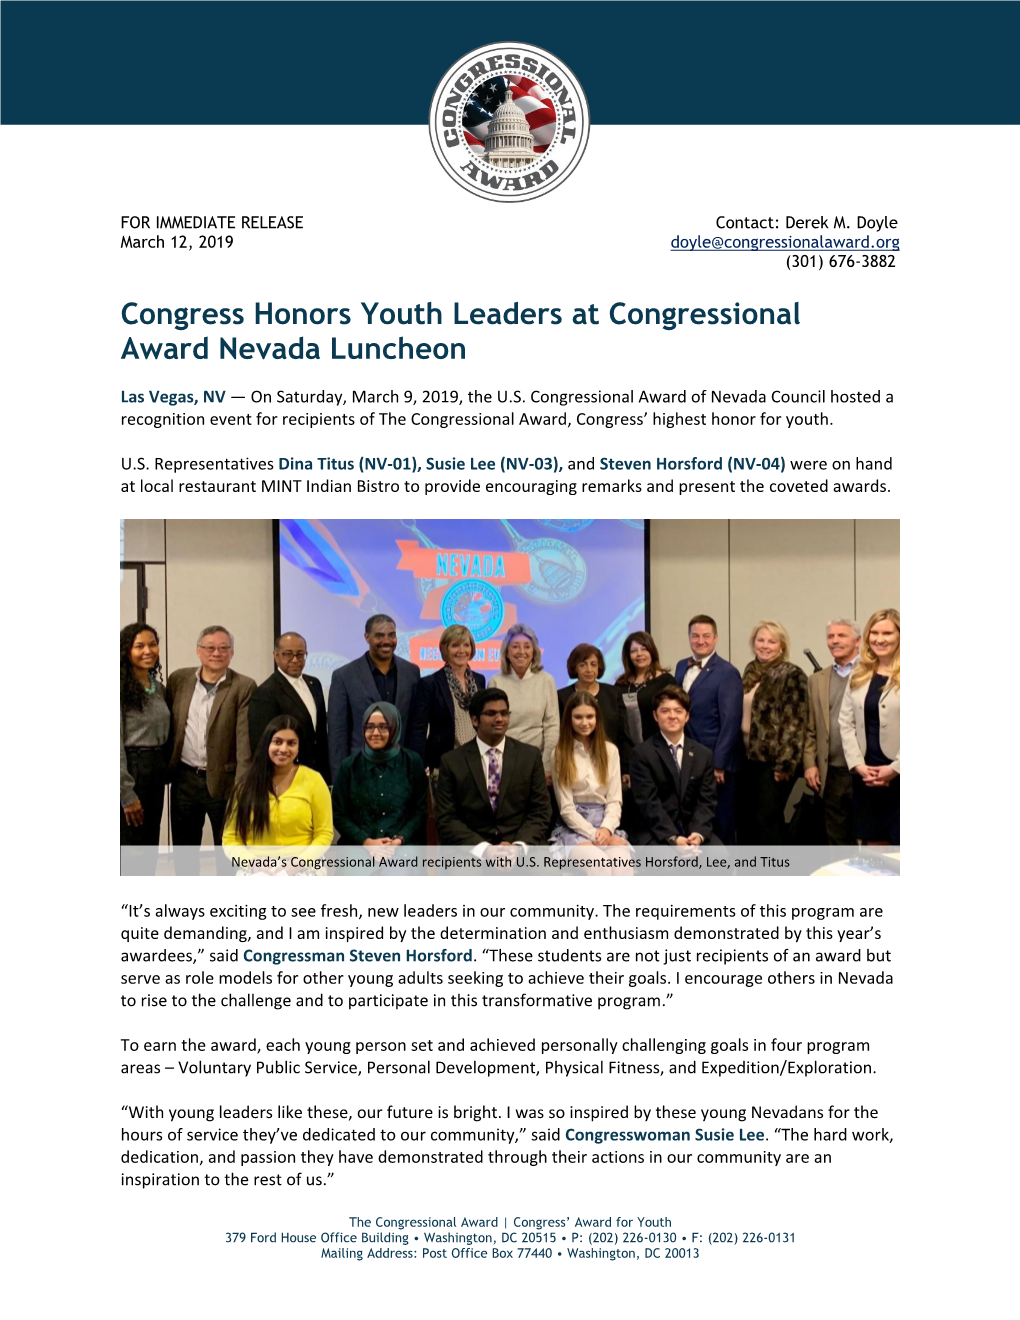 Congress Honors Youth Leaders at Congressional Award Nevada Luncheon